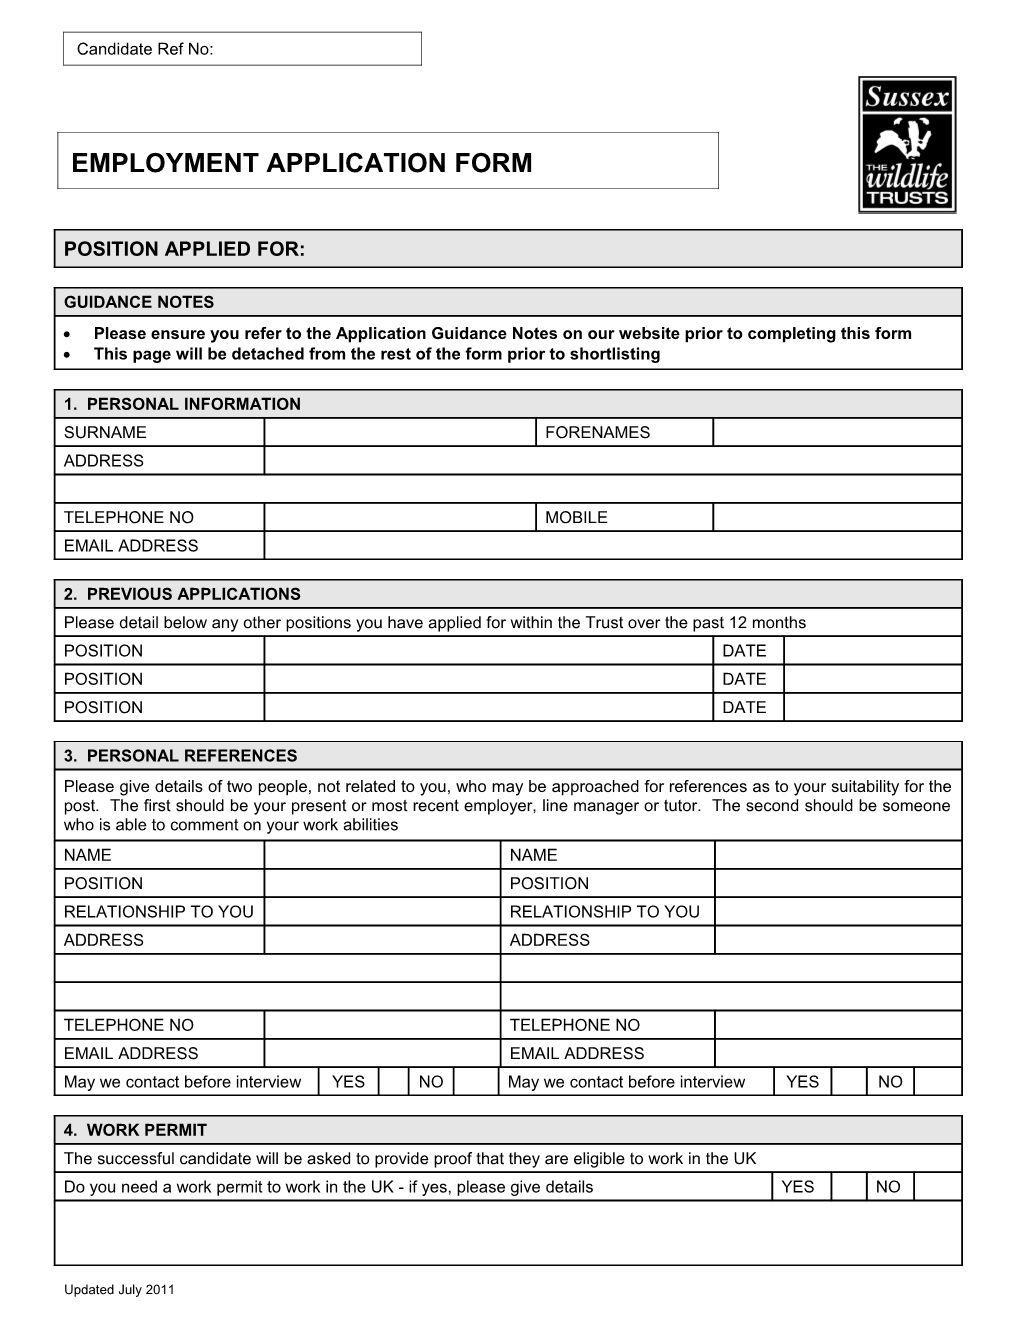 This Page Will Be Detached from the Rest of the Form Prior to Shortlisting